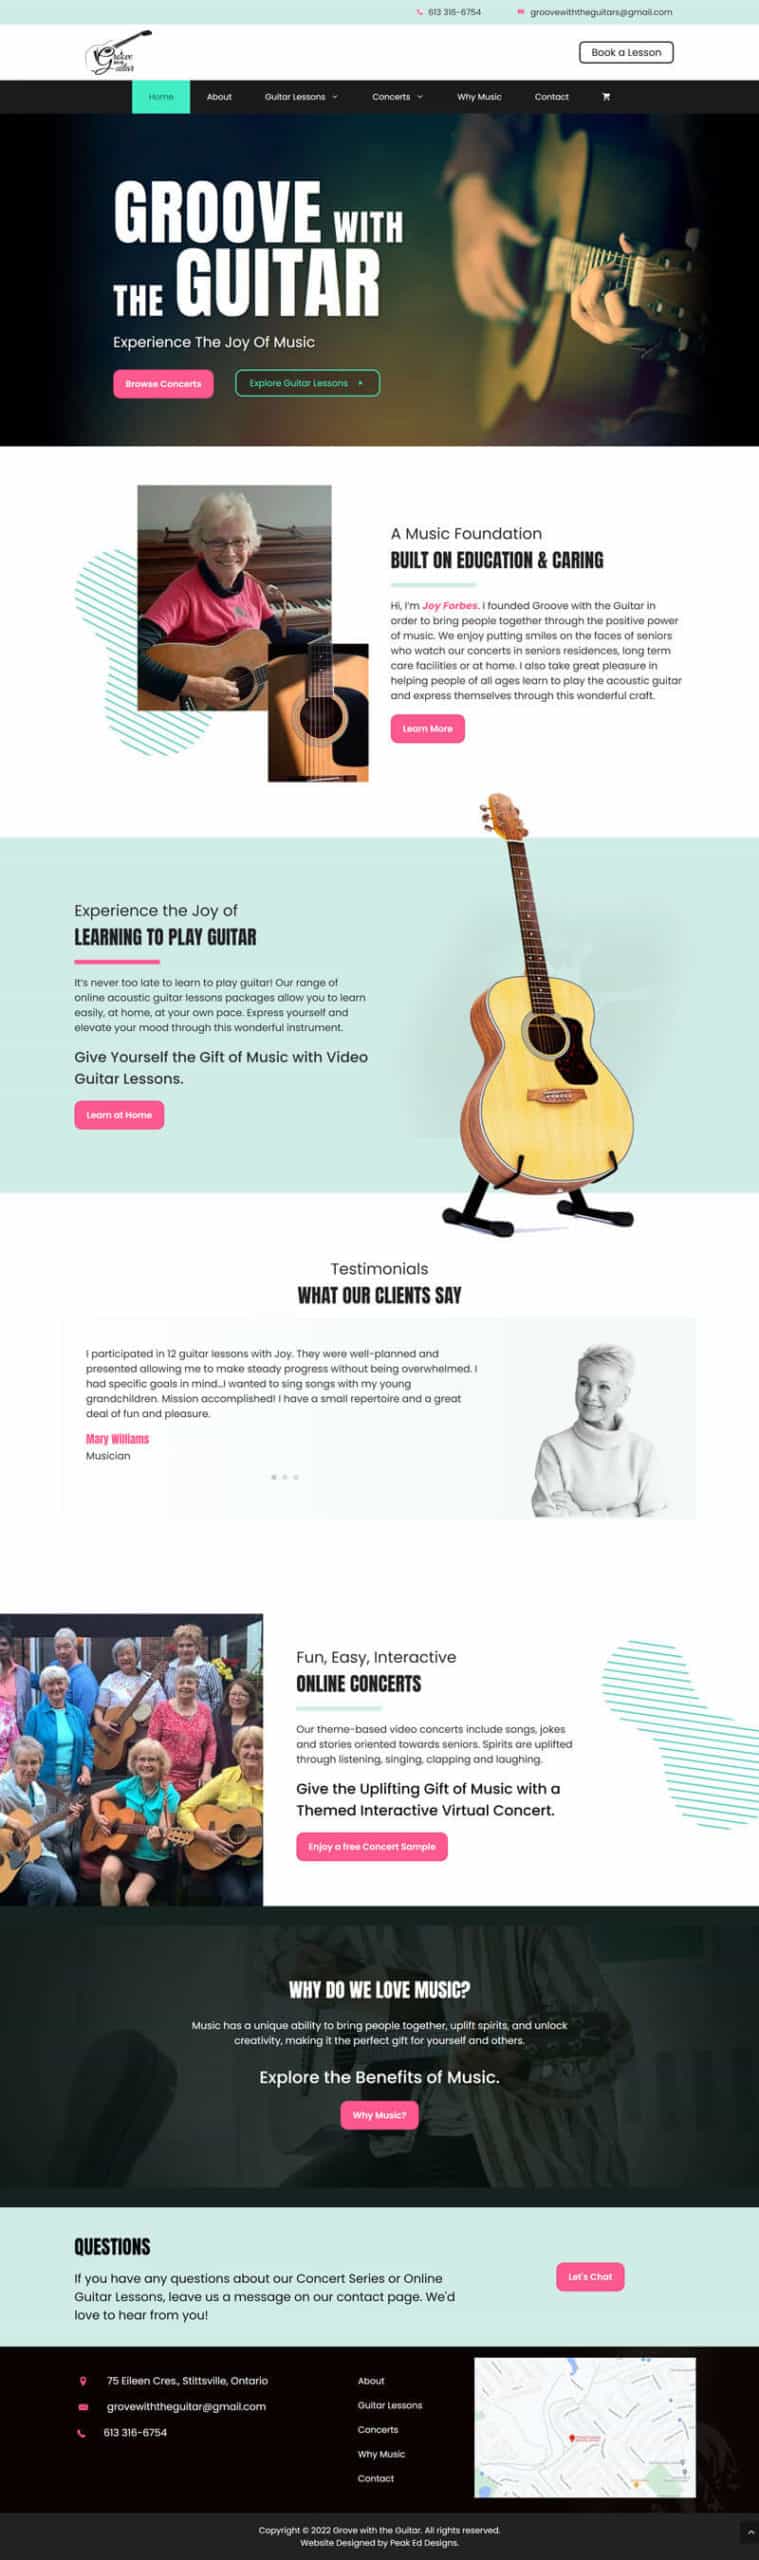 The home page of the new Groove with the Guitar website